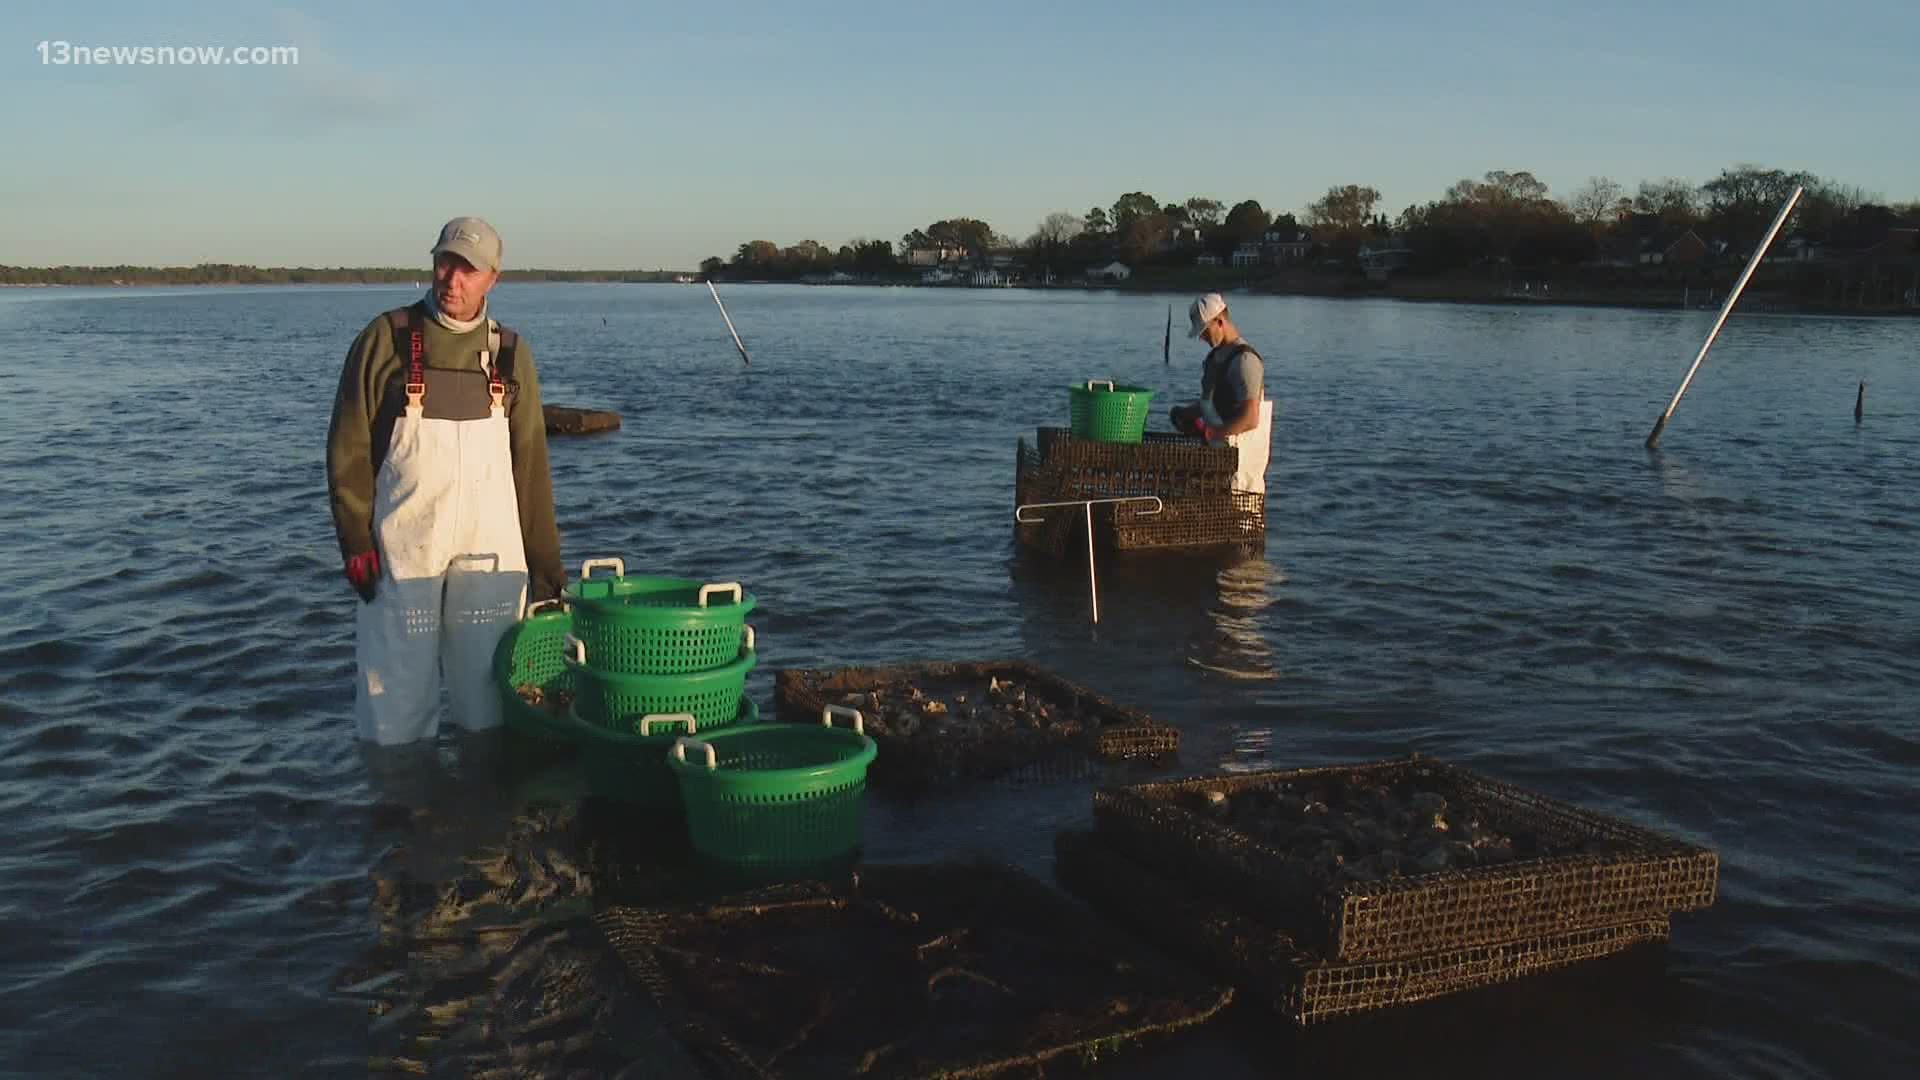 Oyster Farmers have been negatively impacted by the pandemic. With the Thanksgiving coming up, oysters could be something to consider having as an additional dish.